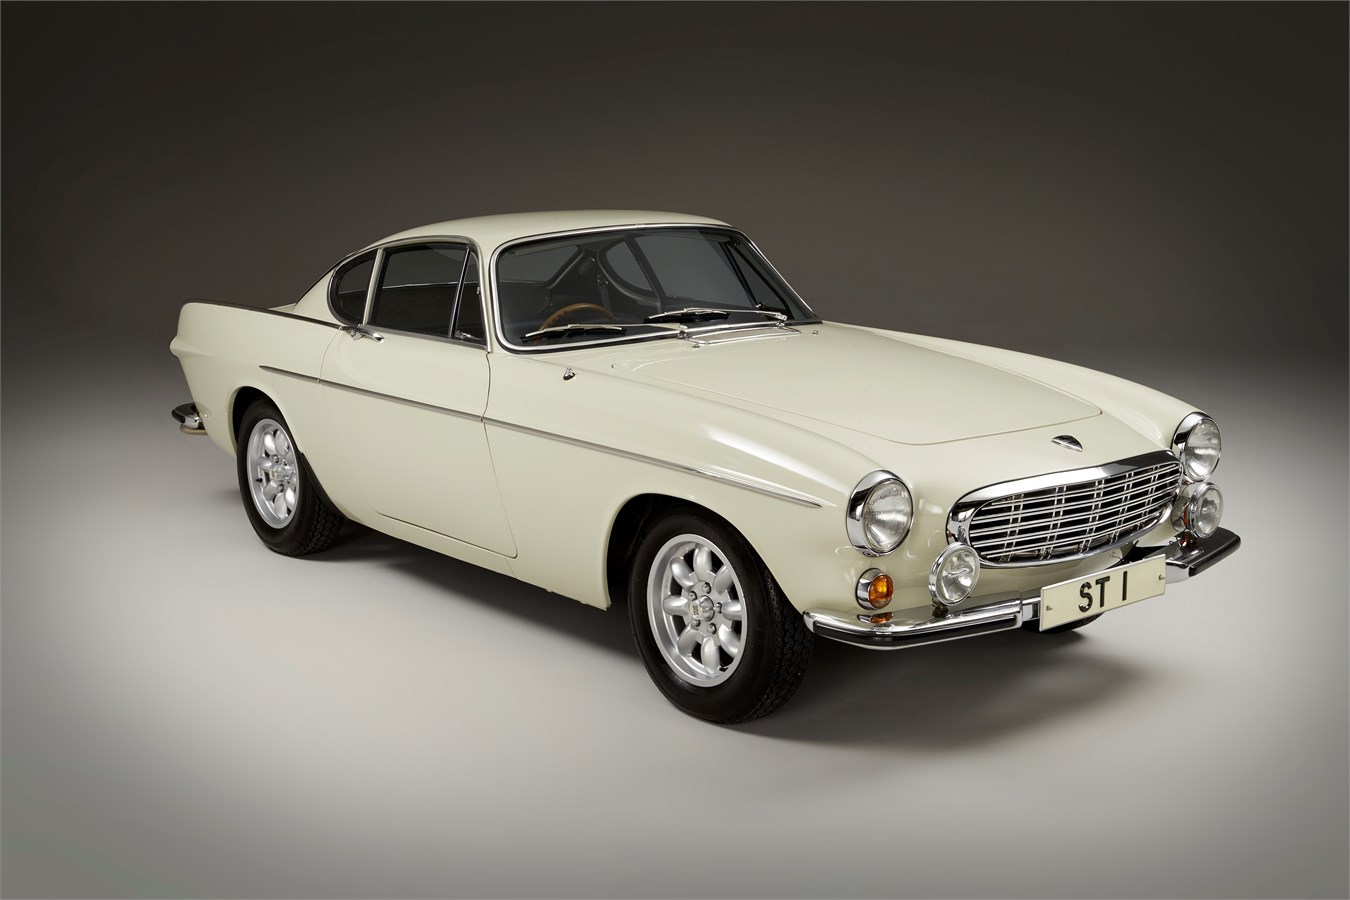 1967 Volvo 1800 S "ST1" from "The Saint" (TV Series)